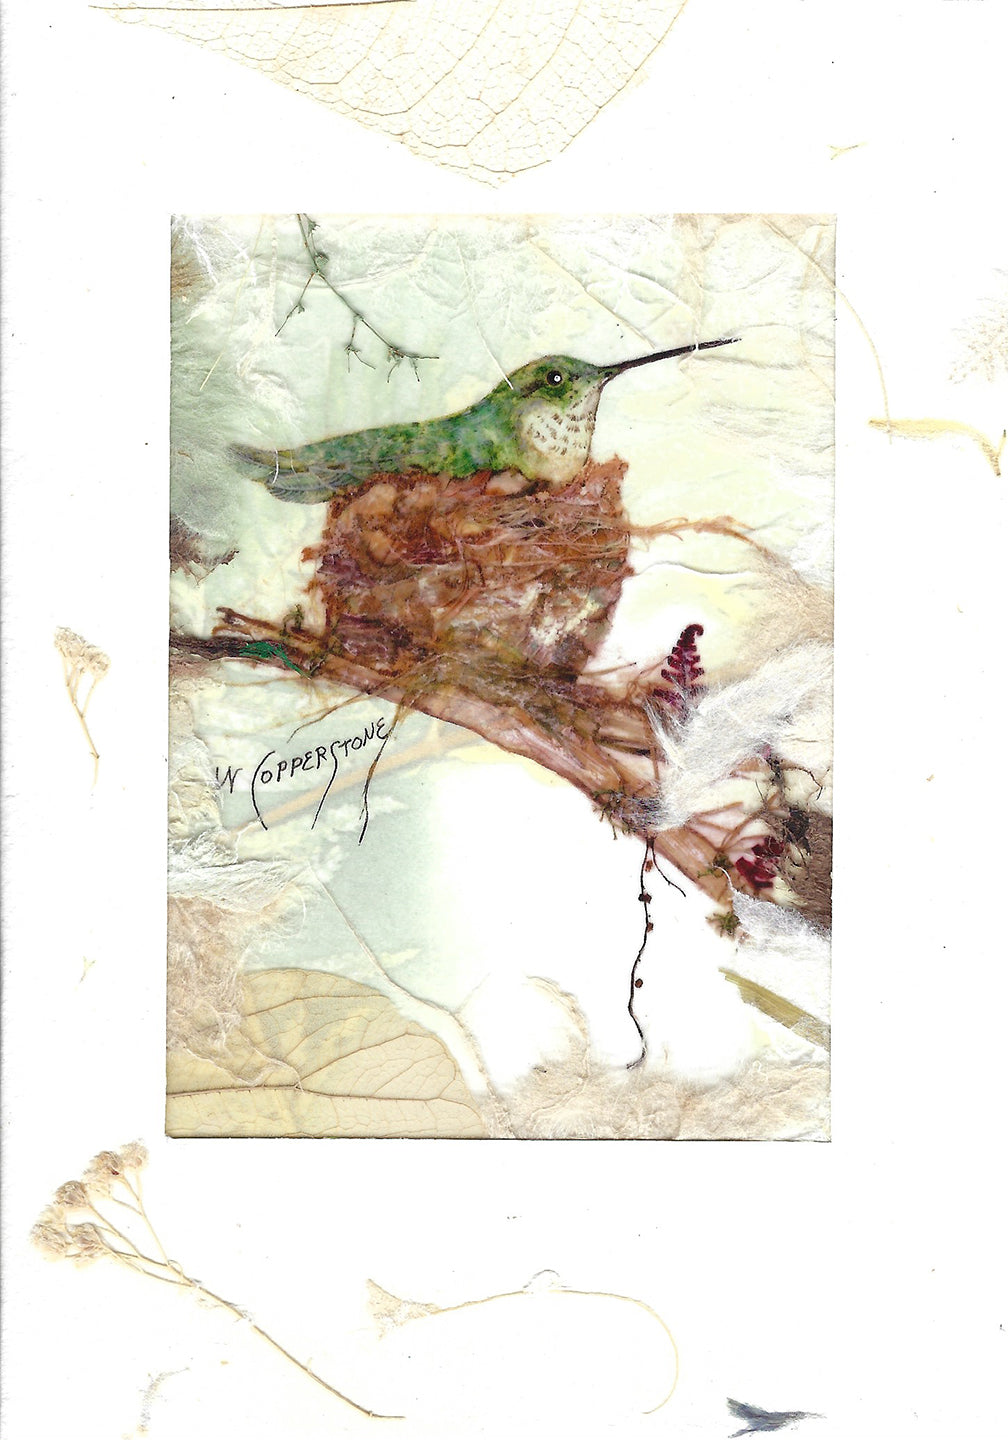 Hummingbird in Nest #3 - Blank greeting card by Janice A. Copperstone of Milford, Mich.  